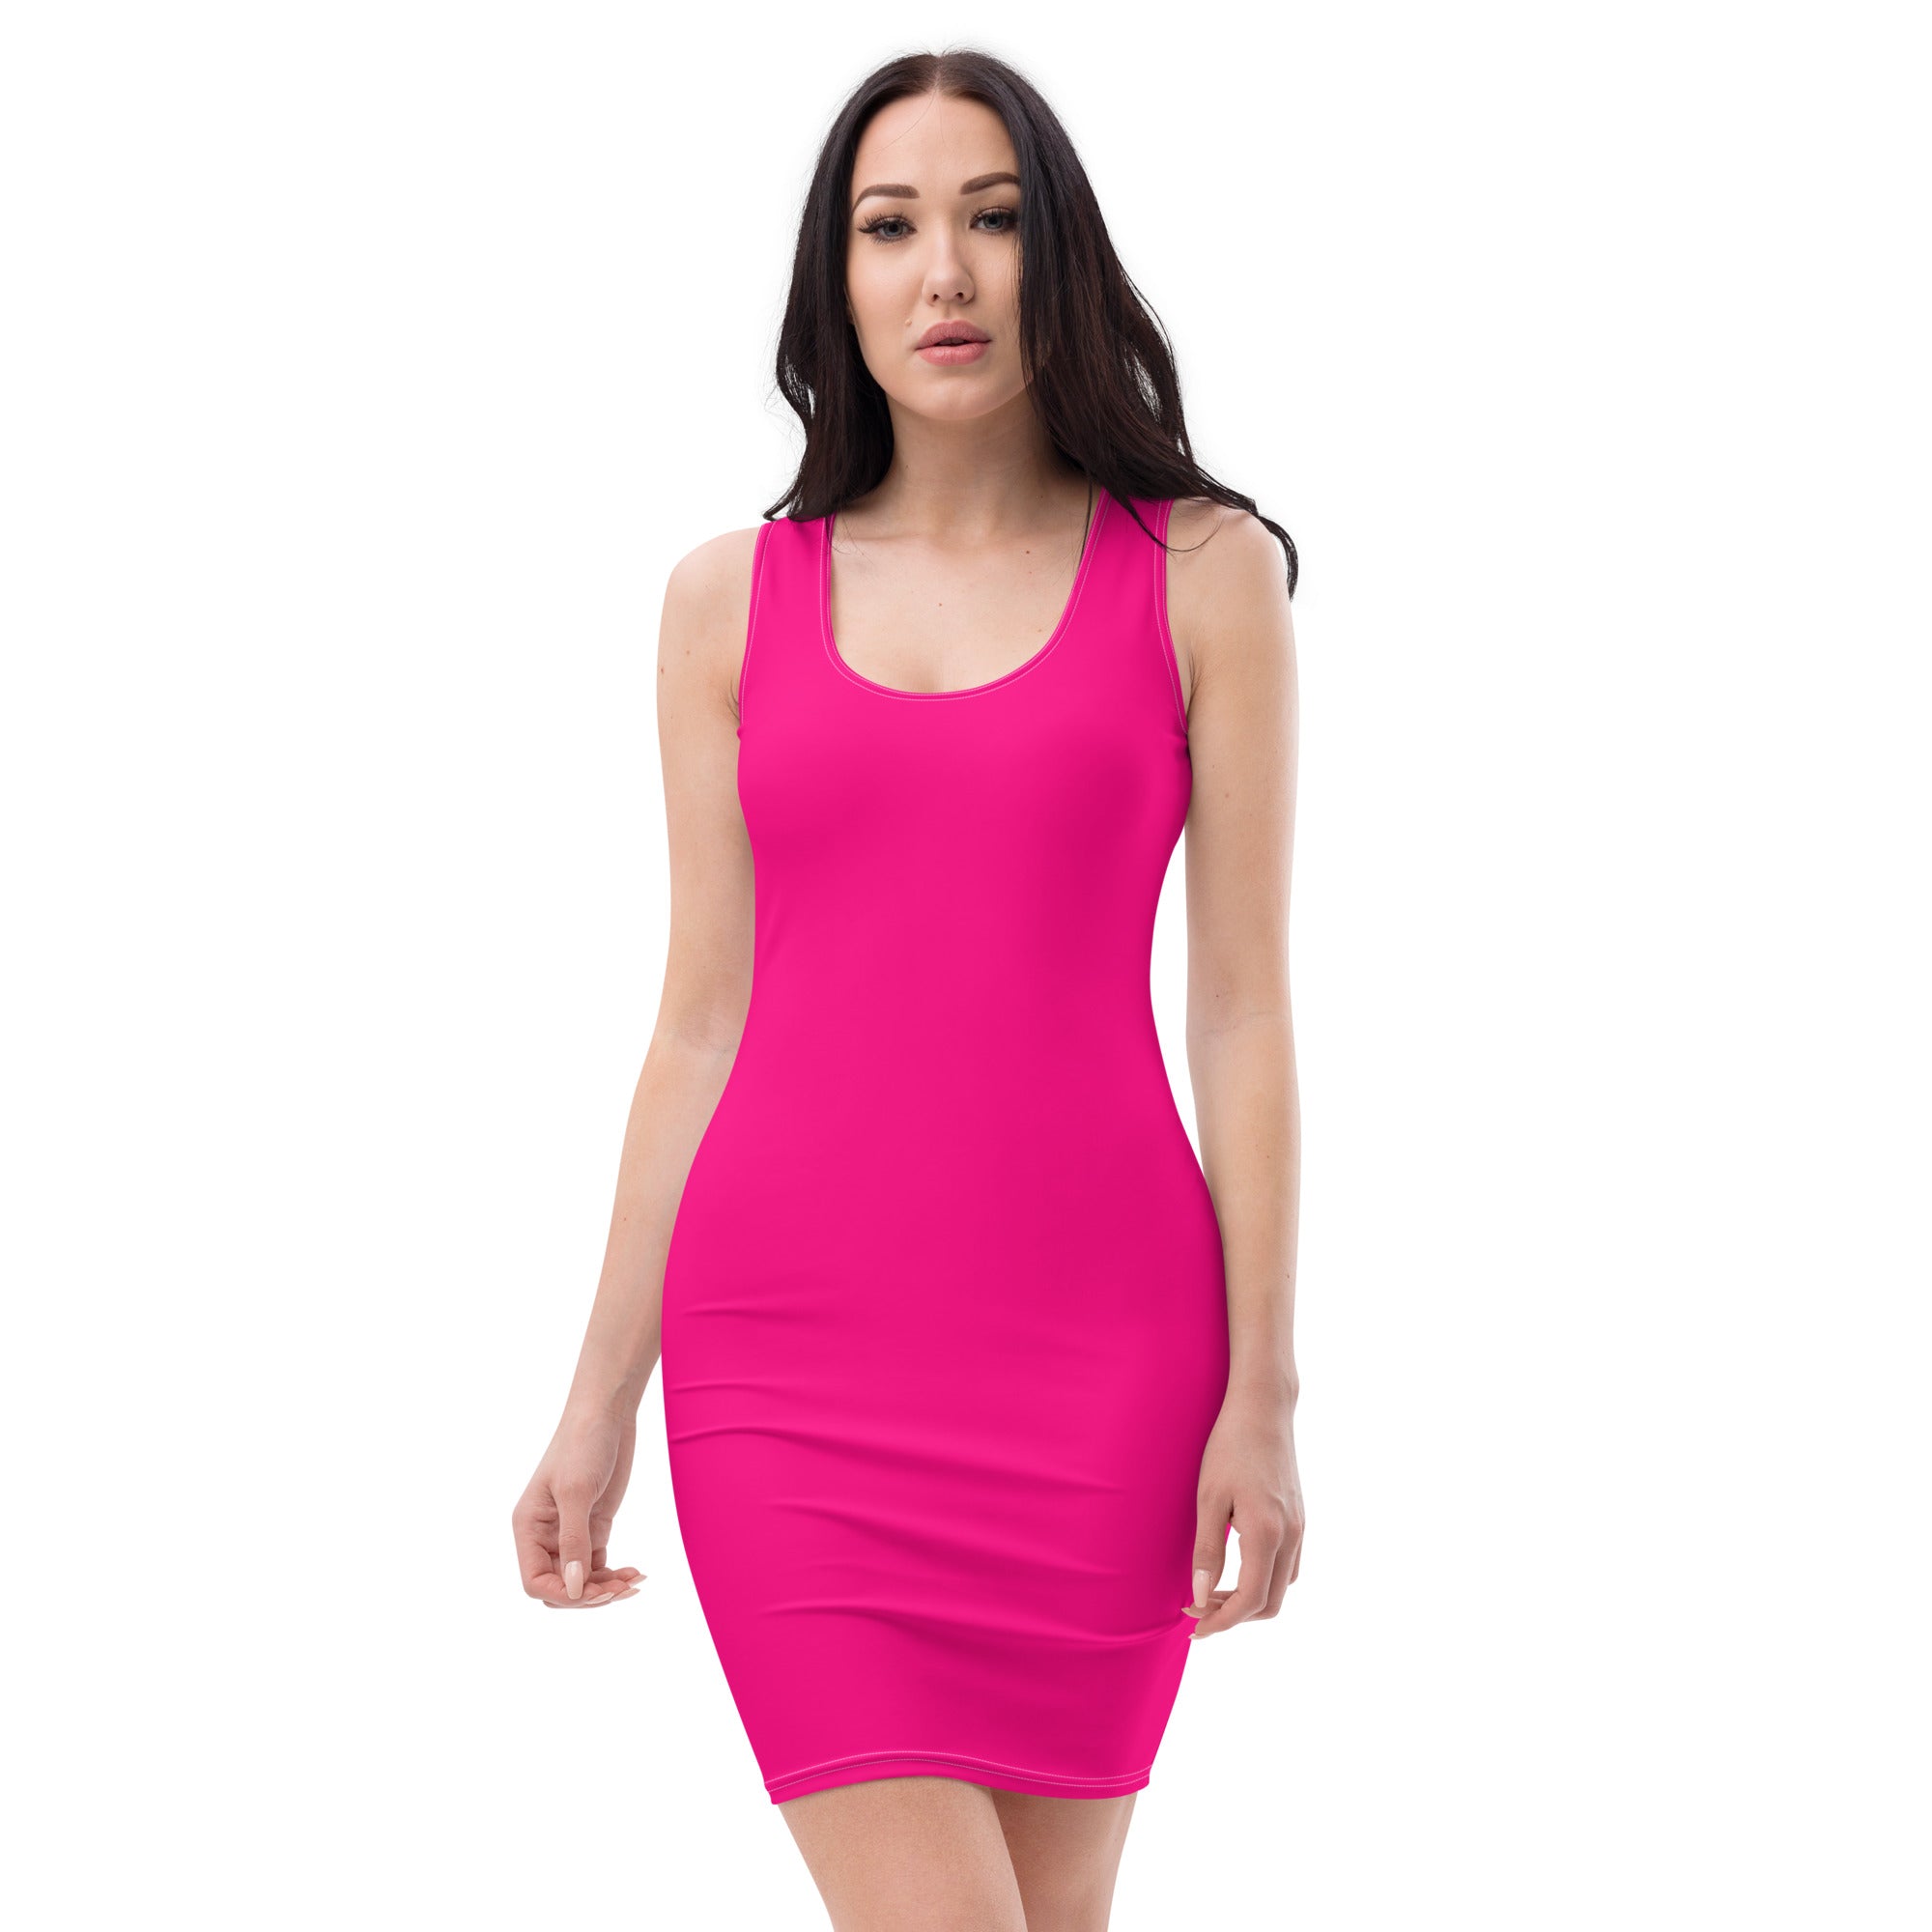 "Radiant in Fuchsia: Women's Solid Summer Fitted Dress", lioness-love